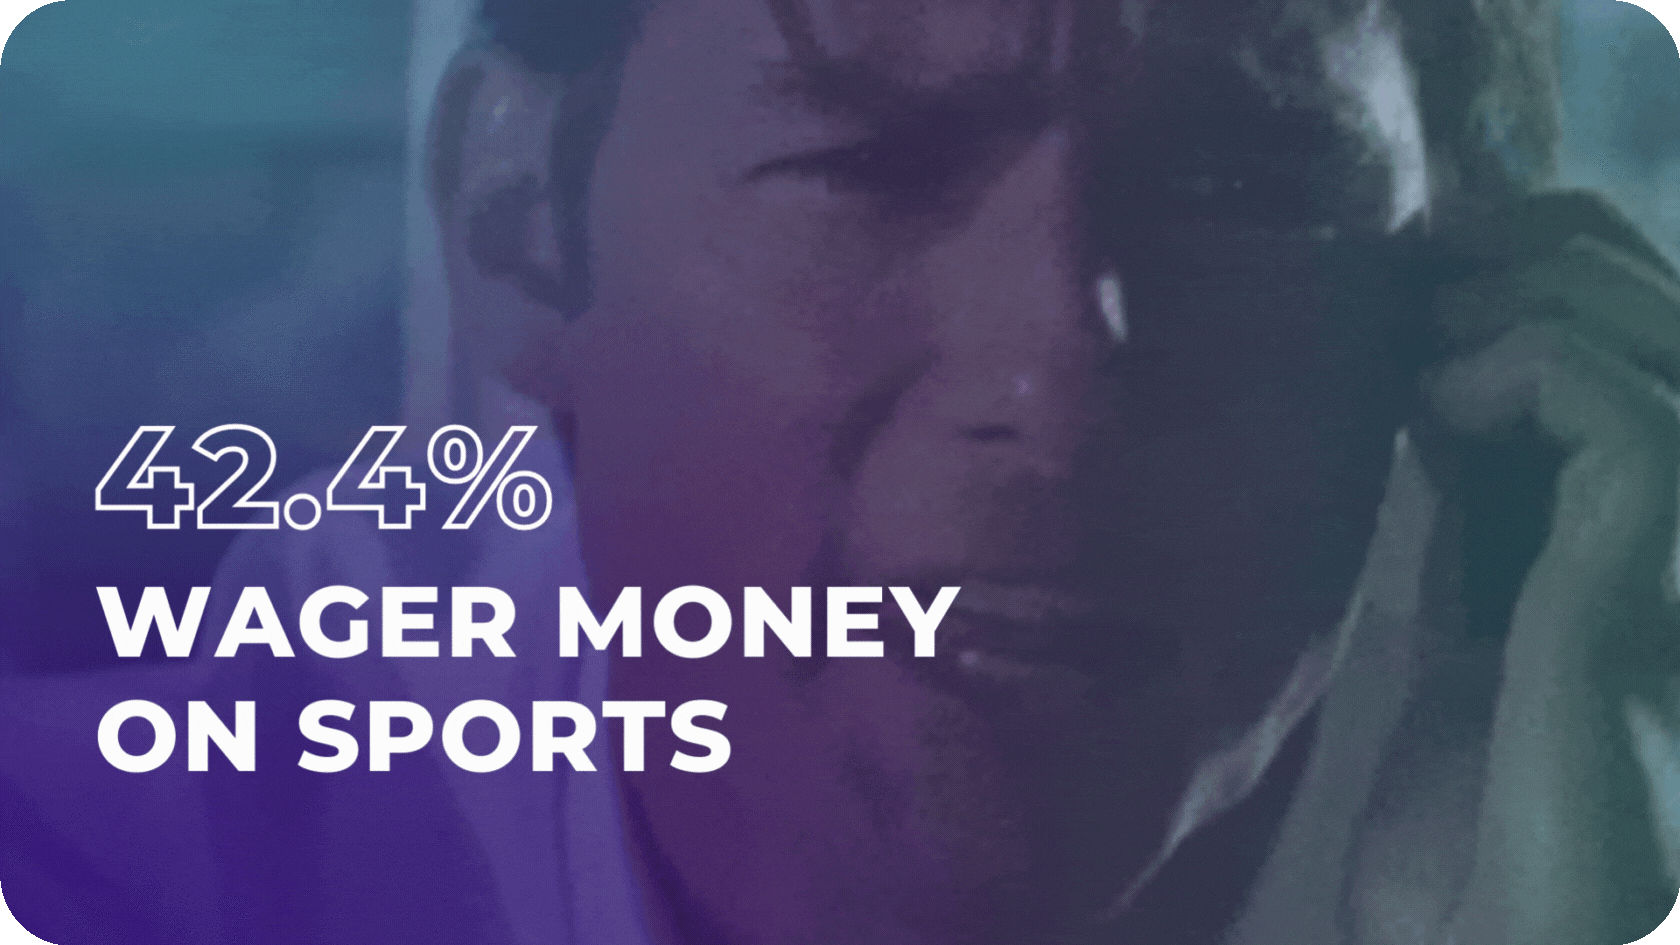 42.4% wager money on sports betting